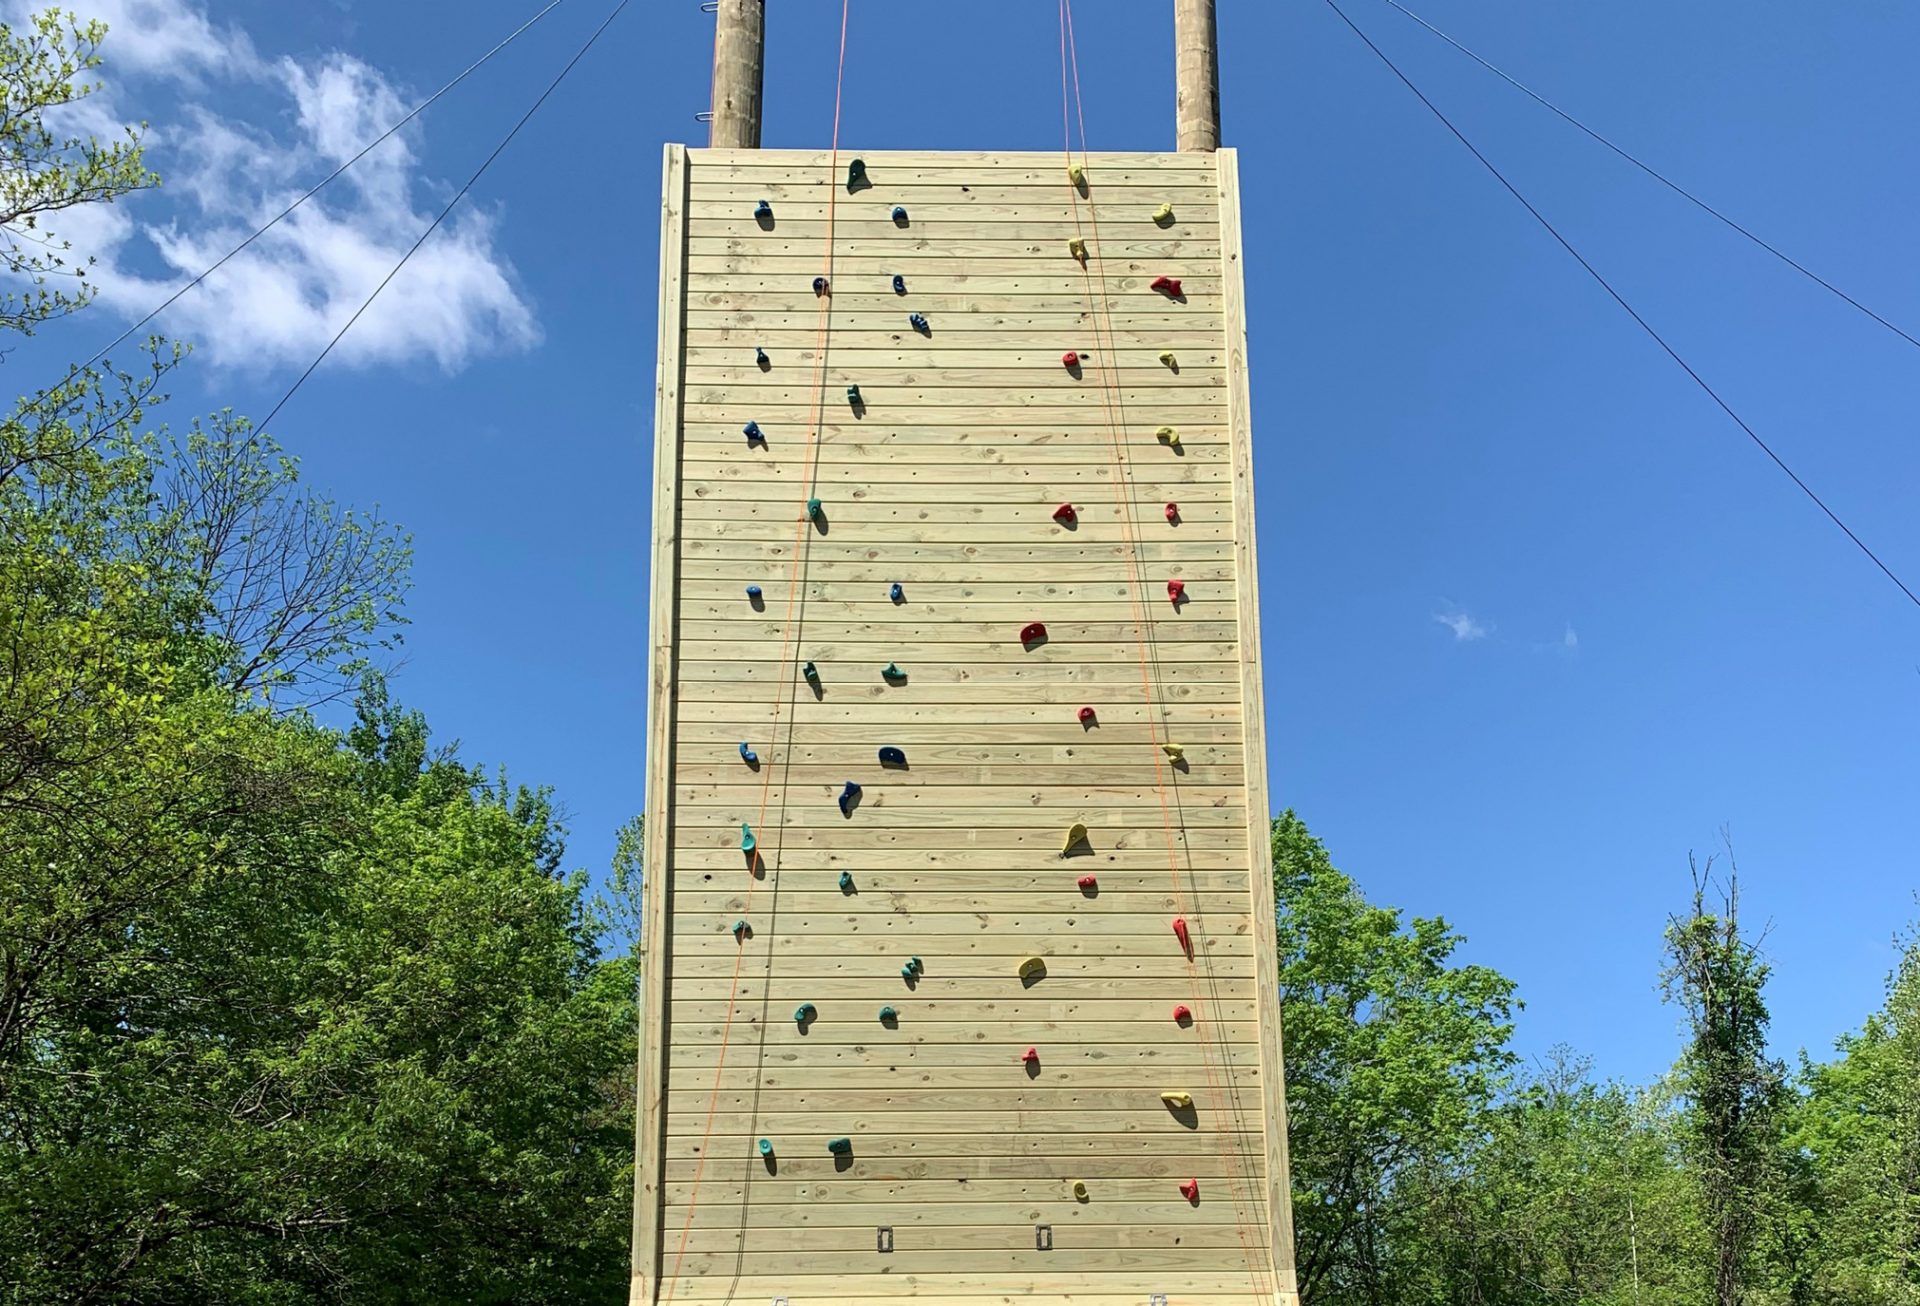 The new climbing wall at Camp Stonybrook with a blue sky and clouds behind it